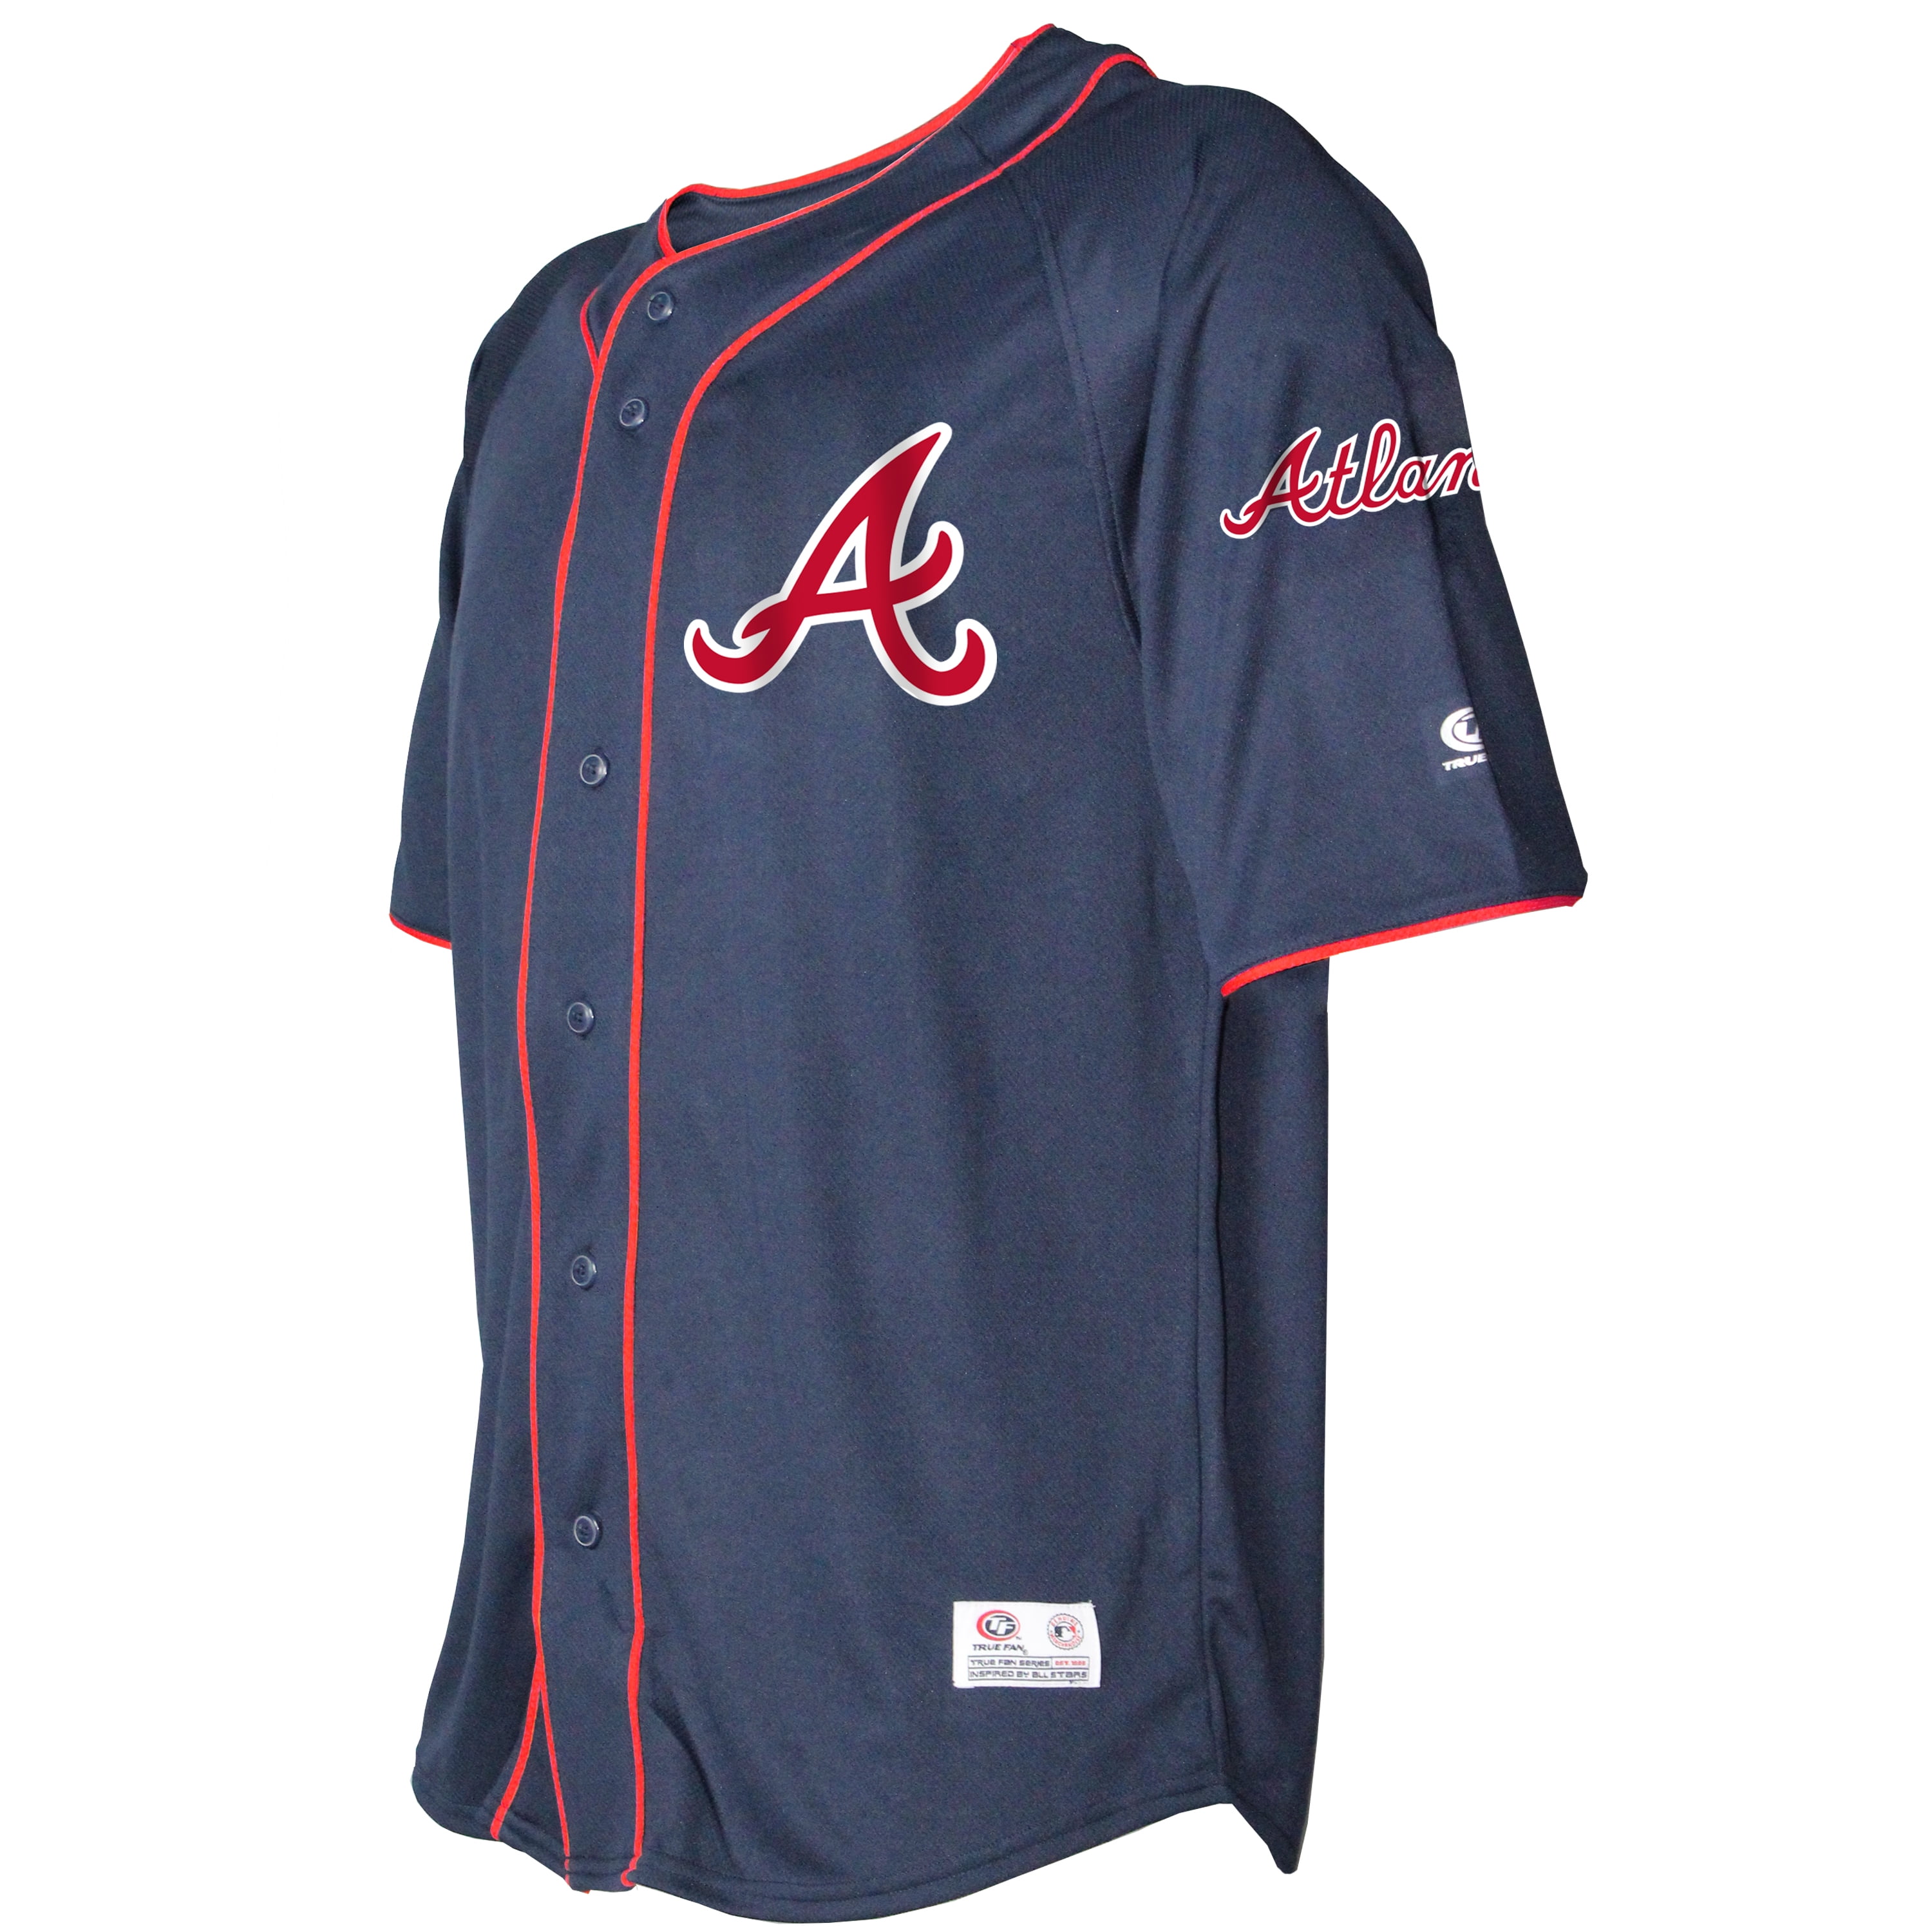 braves home jersey color